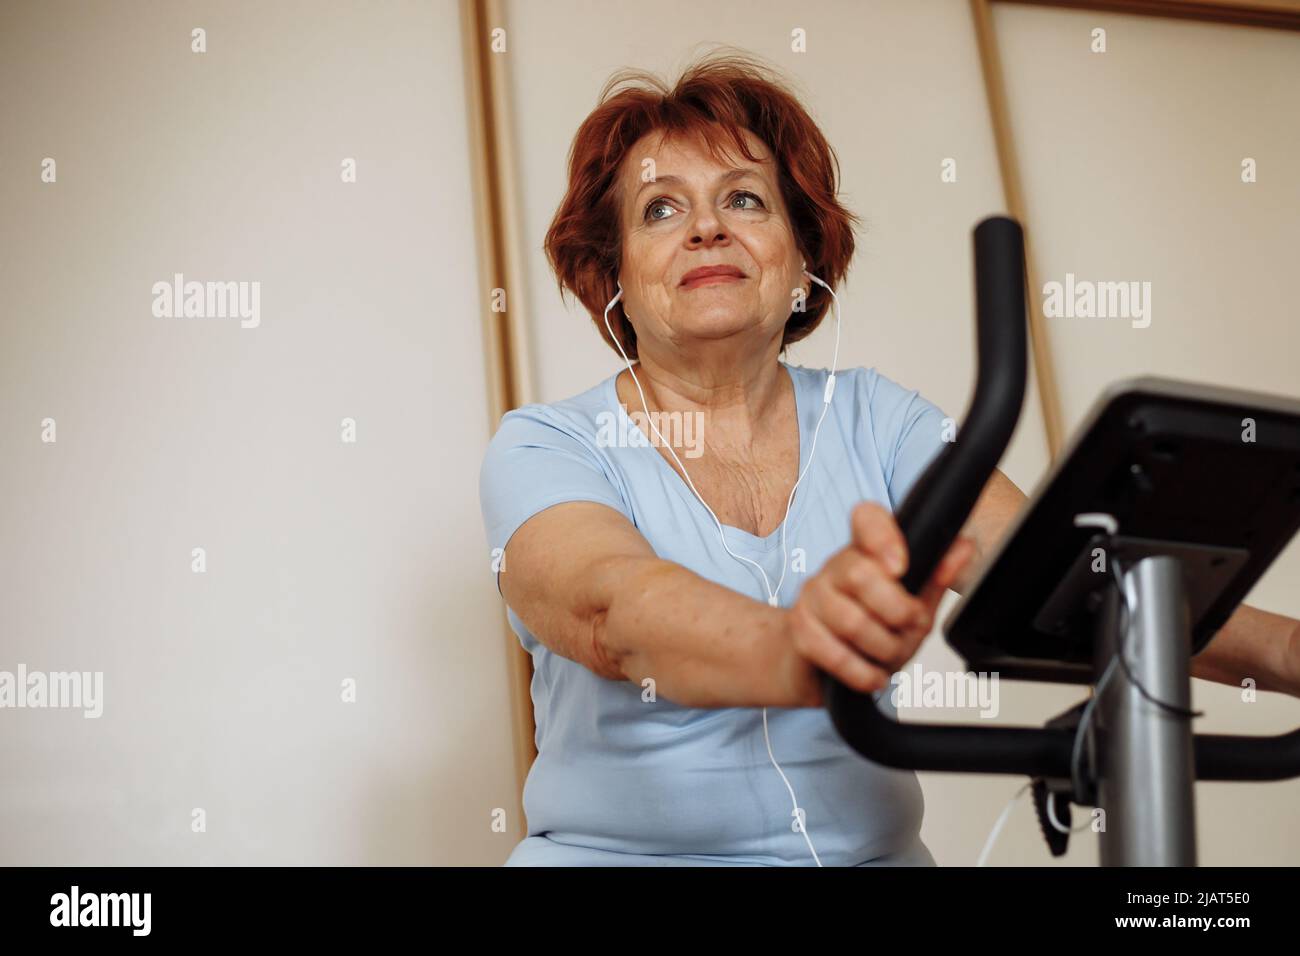 Portrait of elderly woman with dark hair, make-up wearing blue T-shirt, sitting on stationary bicycle, doing exercises. Stock Photo